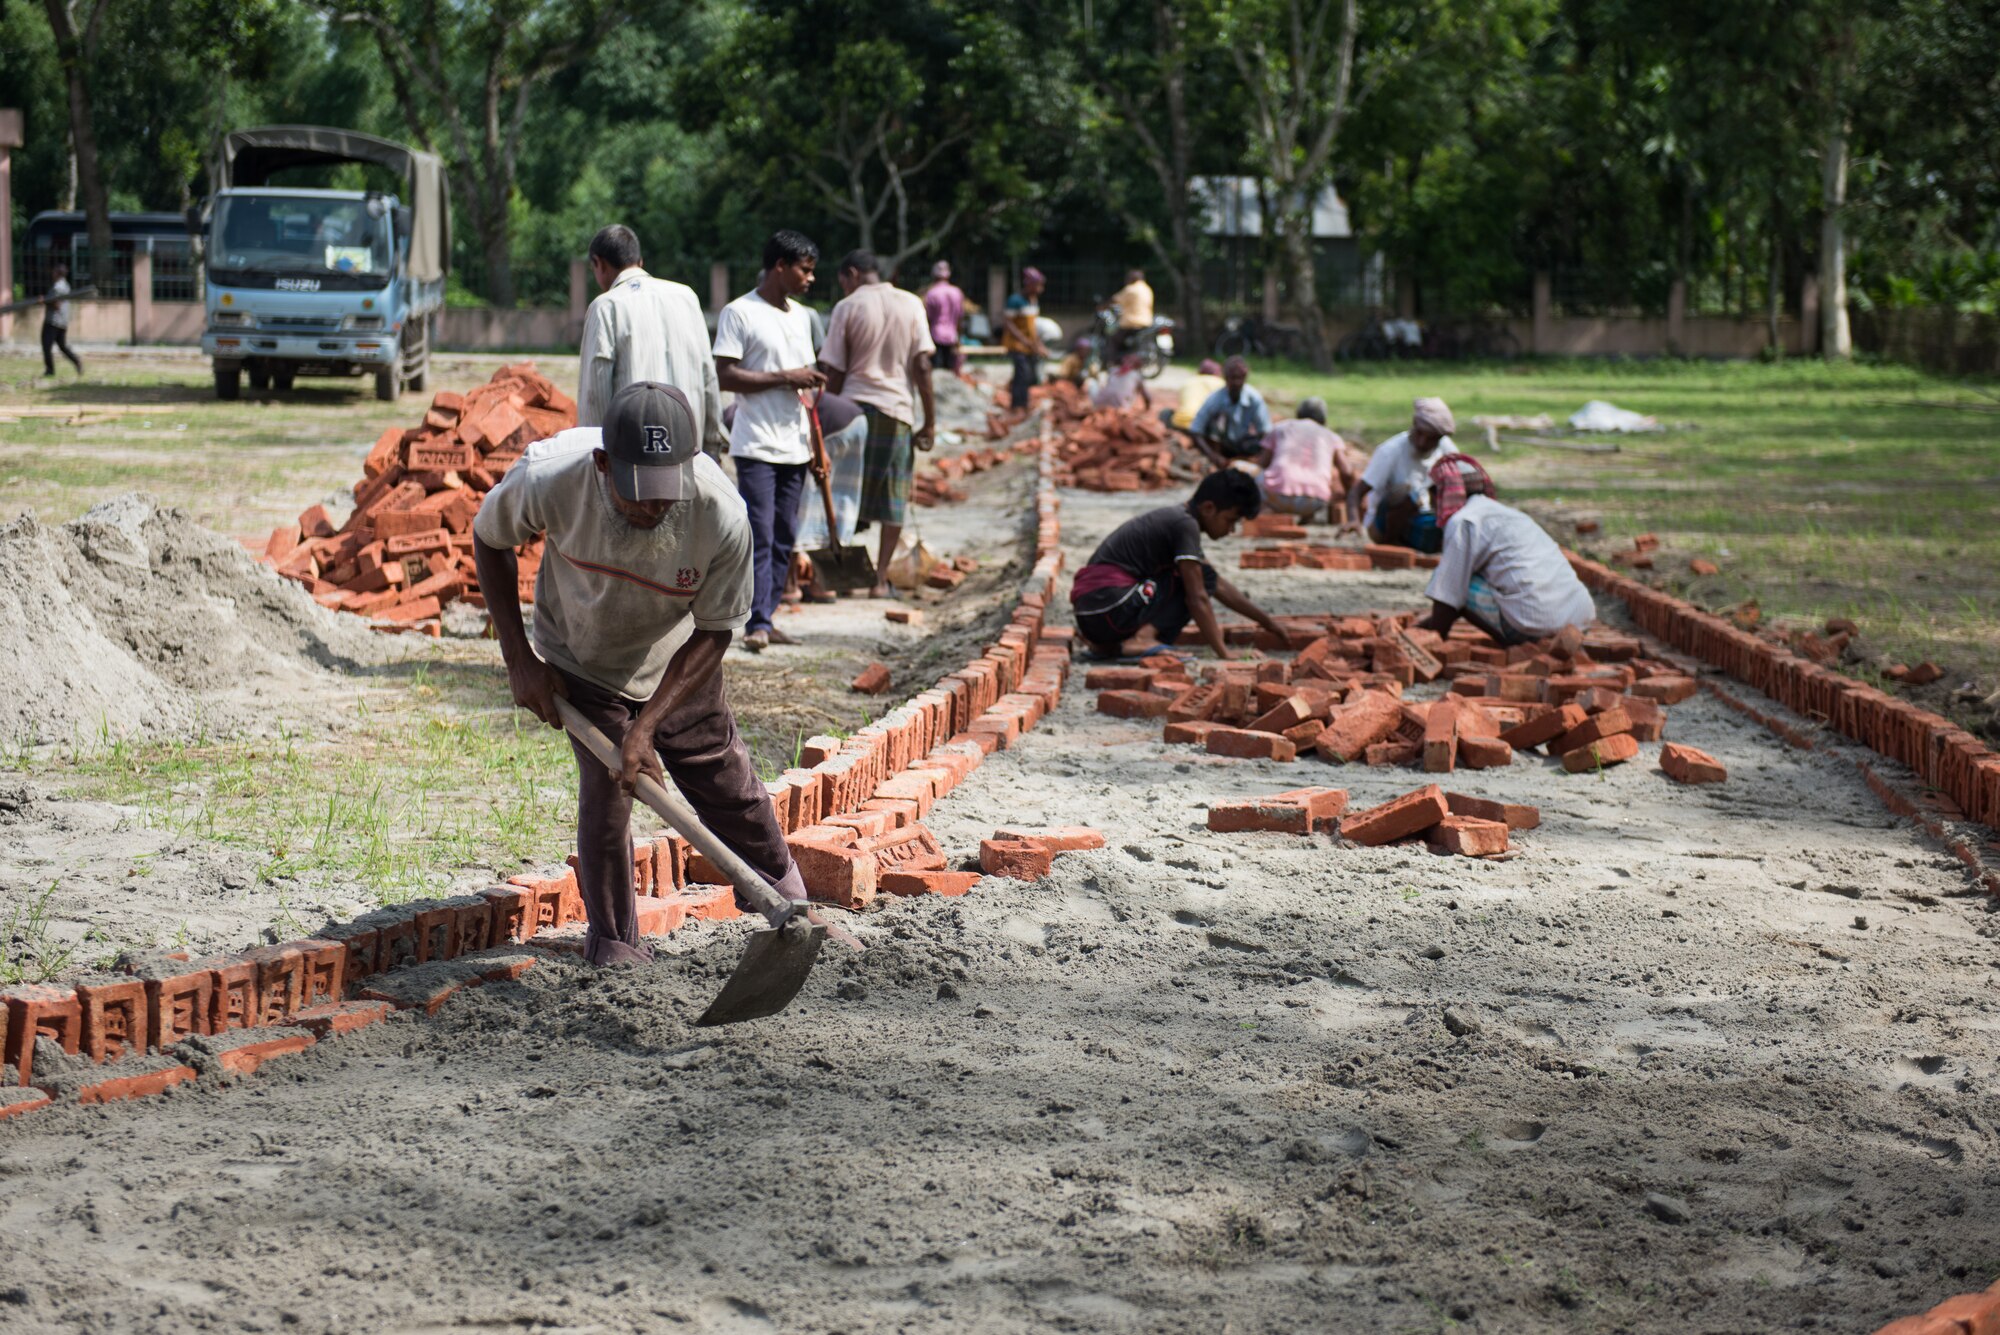 Bangladeshi workers construct a pathway leading to the medical clinic for Pacific Angel 19-1 in Lalmonirhat, Bangladesh, June 22, 2019. Pacific Angel 2019 is a joint and combined humanitarian assistance engagement, enhancing participating nations’ humanitarian assistance and disaster relief capabilities while providing beneficial services to people in need throughout South Asia. (U.S. Air Force photo by Staff Sgt. Ramon A. Adelan)